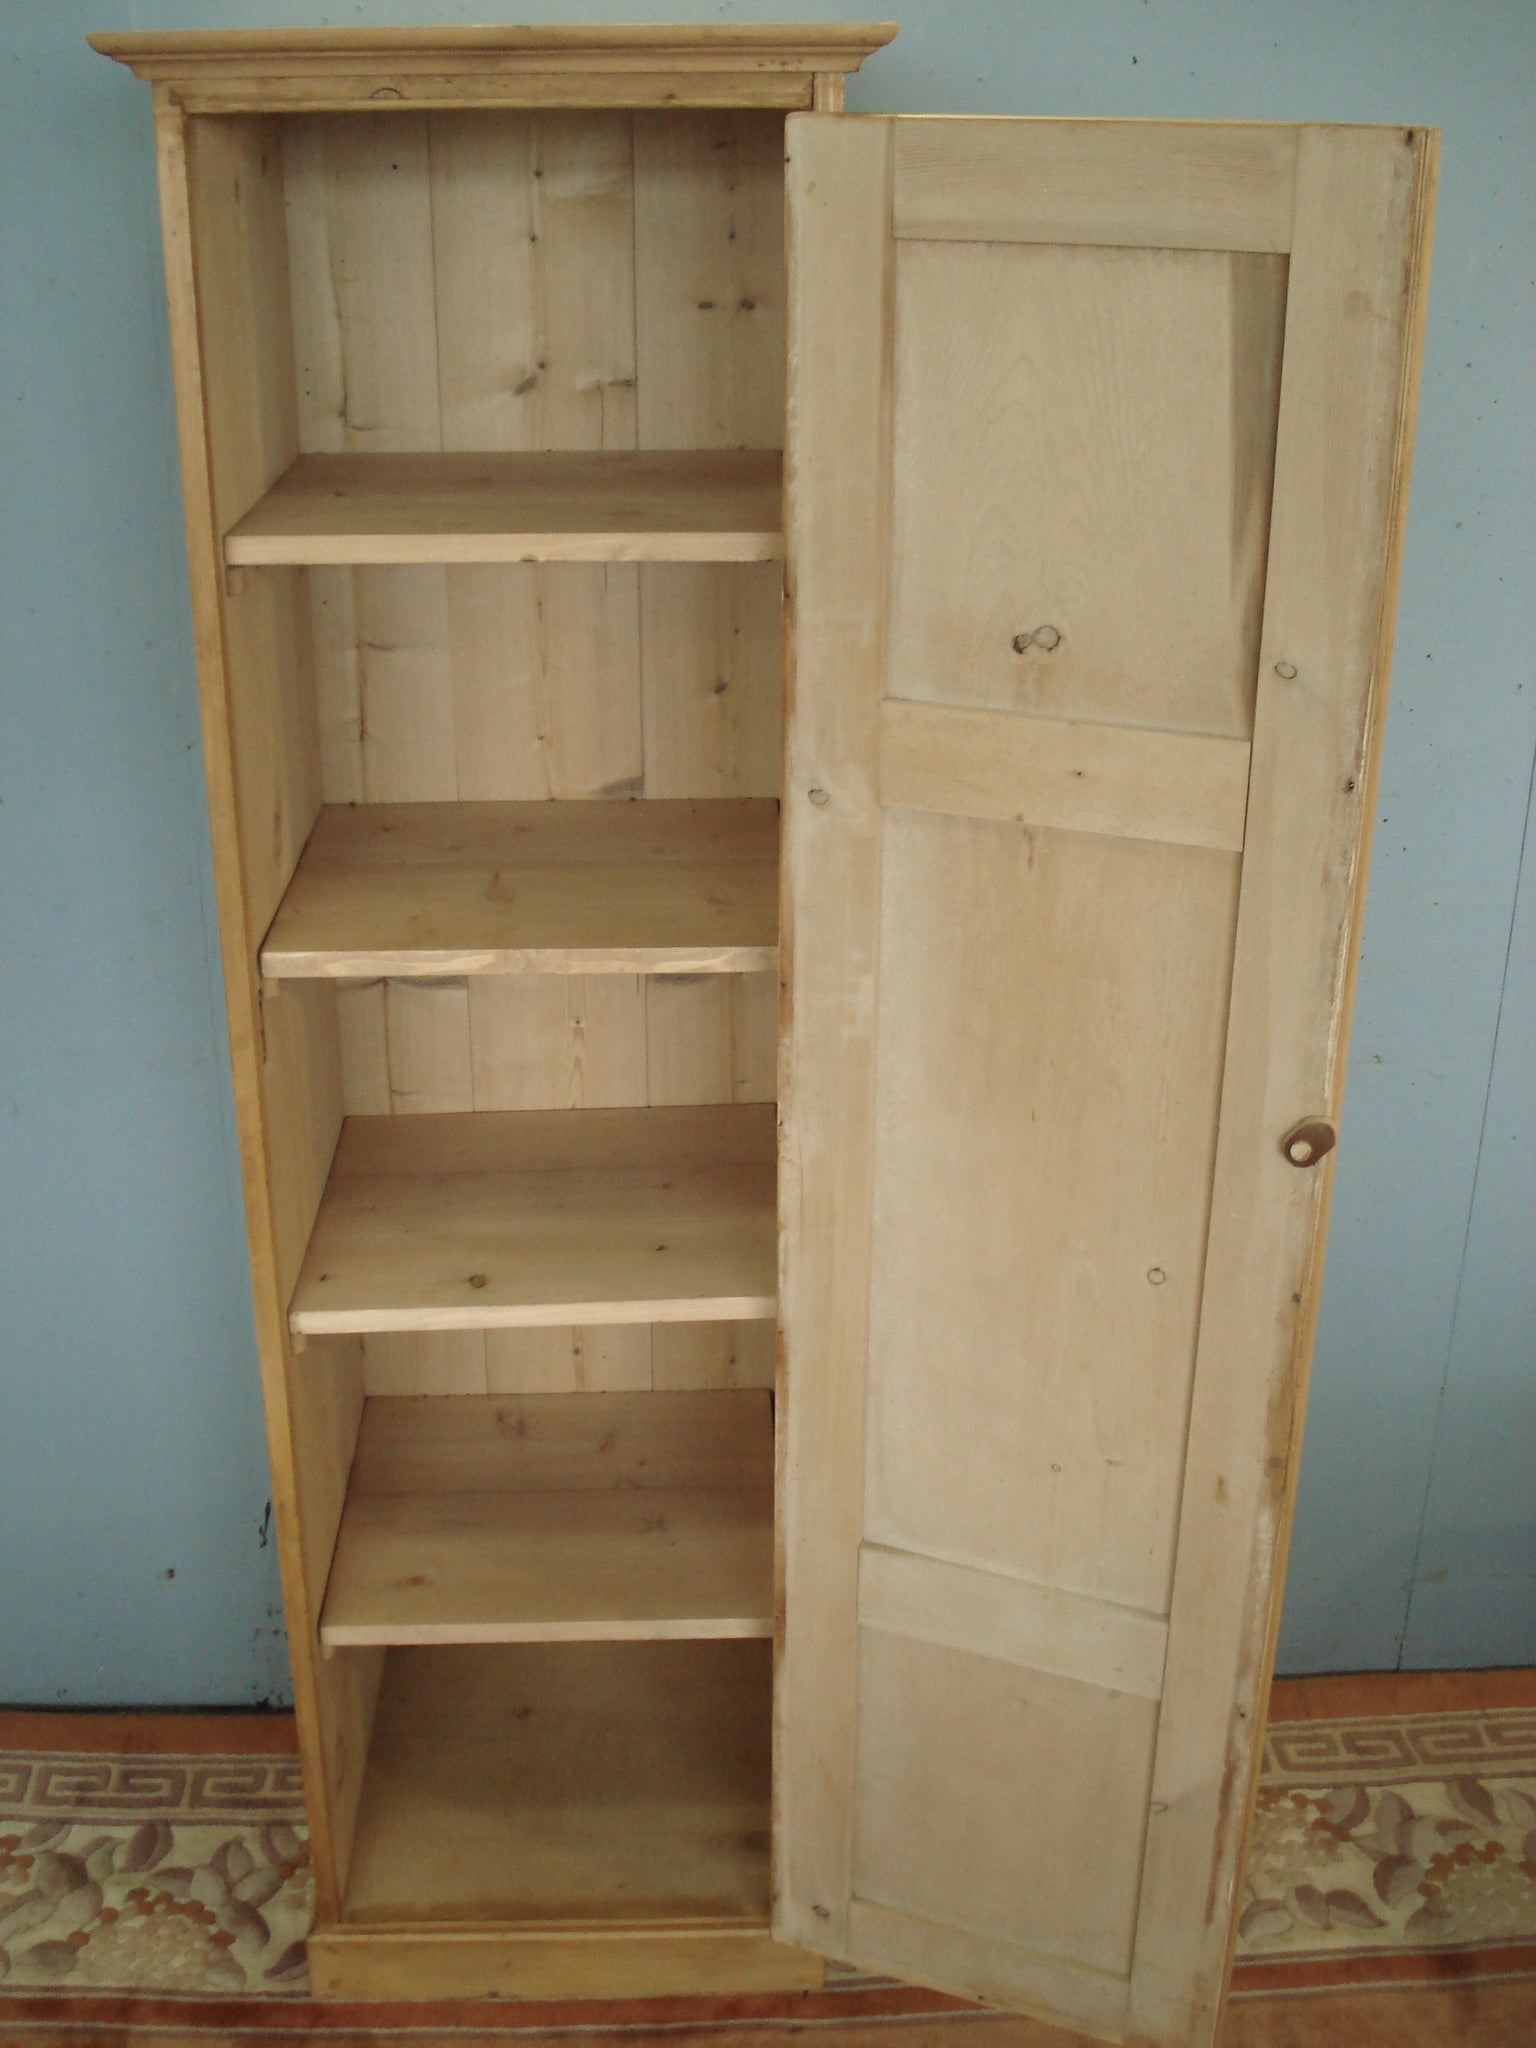 Sentry Box, Small antique pine cupboard. Right hand hung.